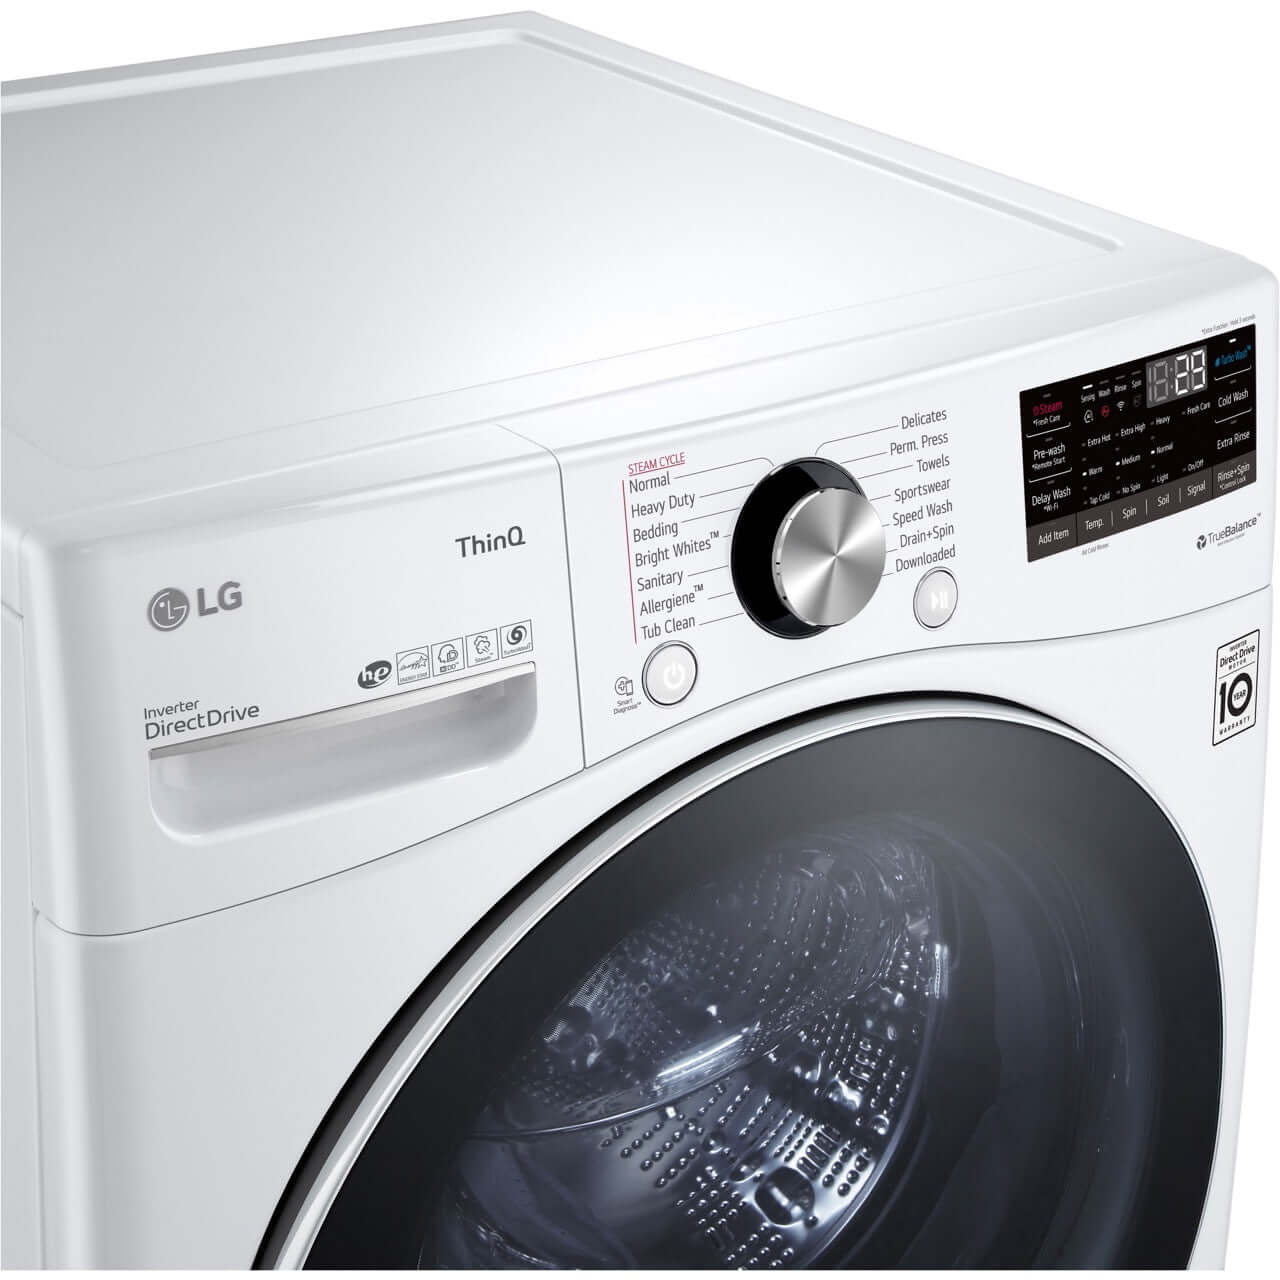 LG 27 In. 5.0-Cu. Ft. Front Load Washer with Built-In Intelligence in White (WM4200HWA)